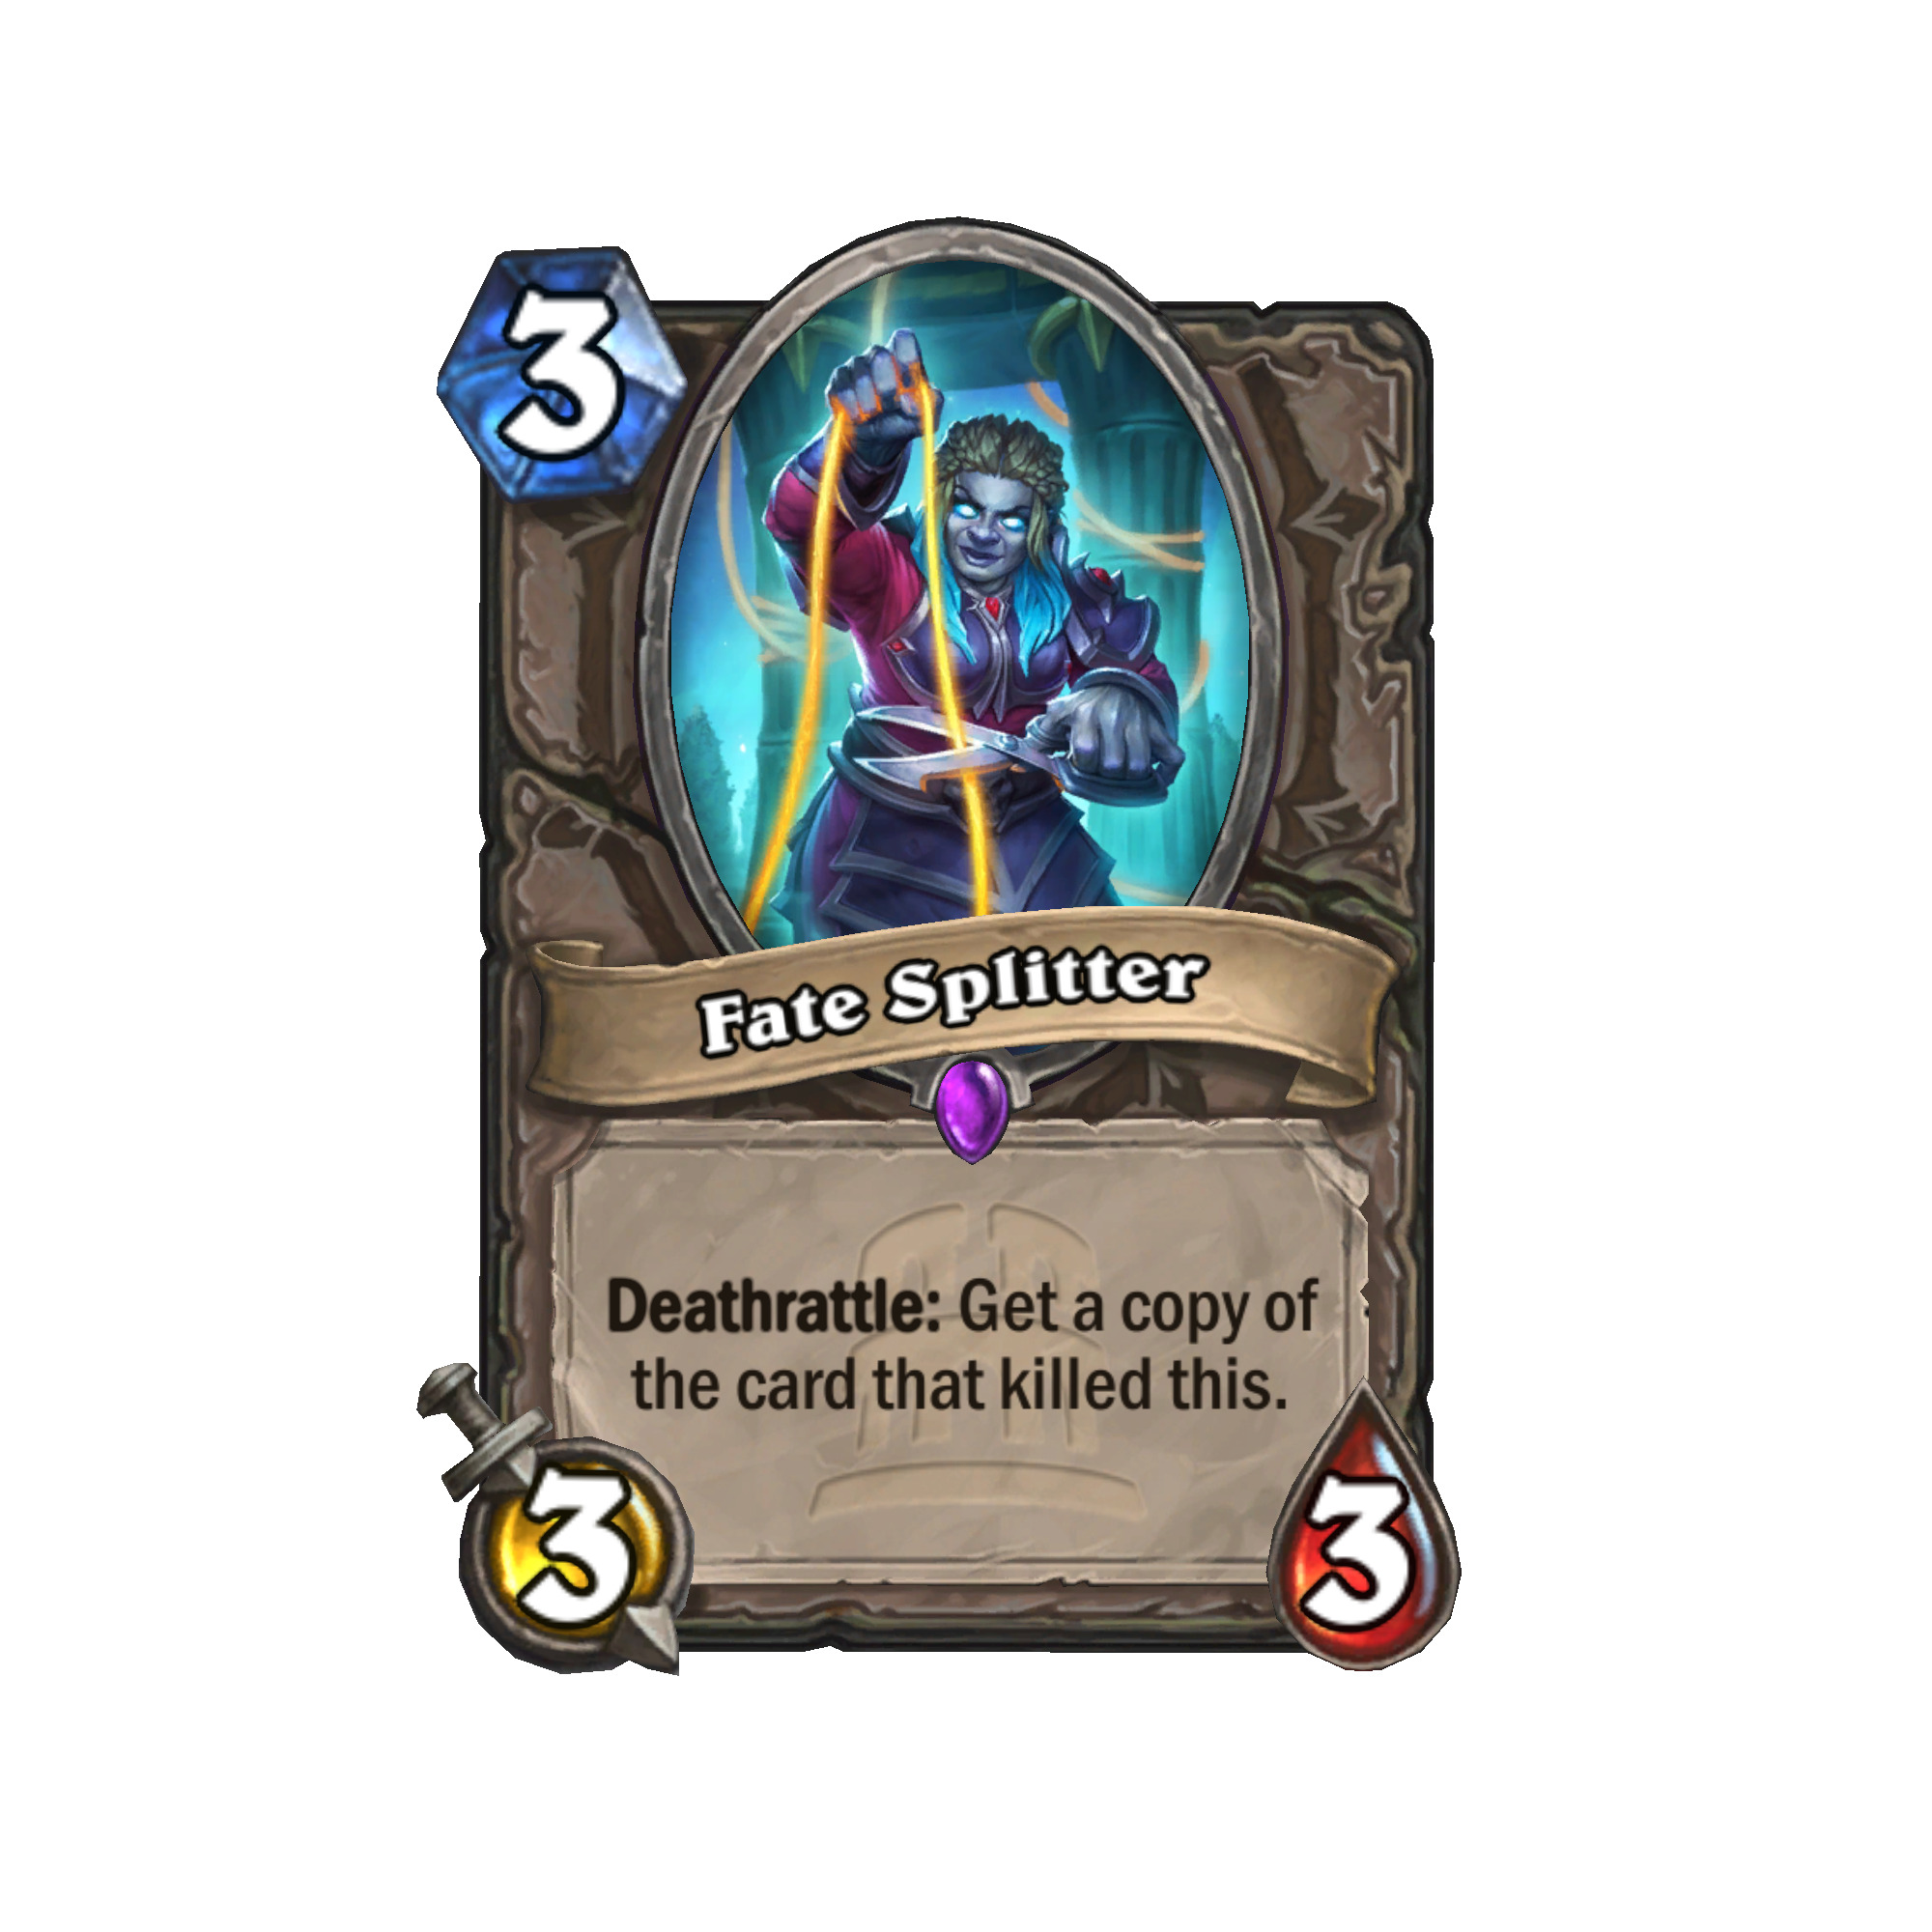 Fate Splitter in the new Hearthstone expansion (Image via Blizzard Entertainment)